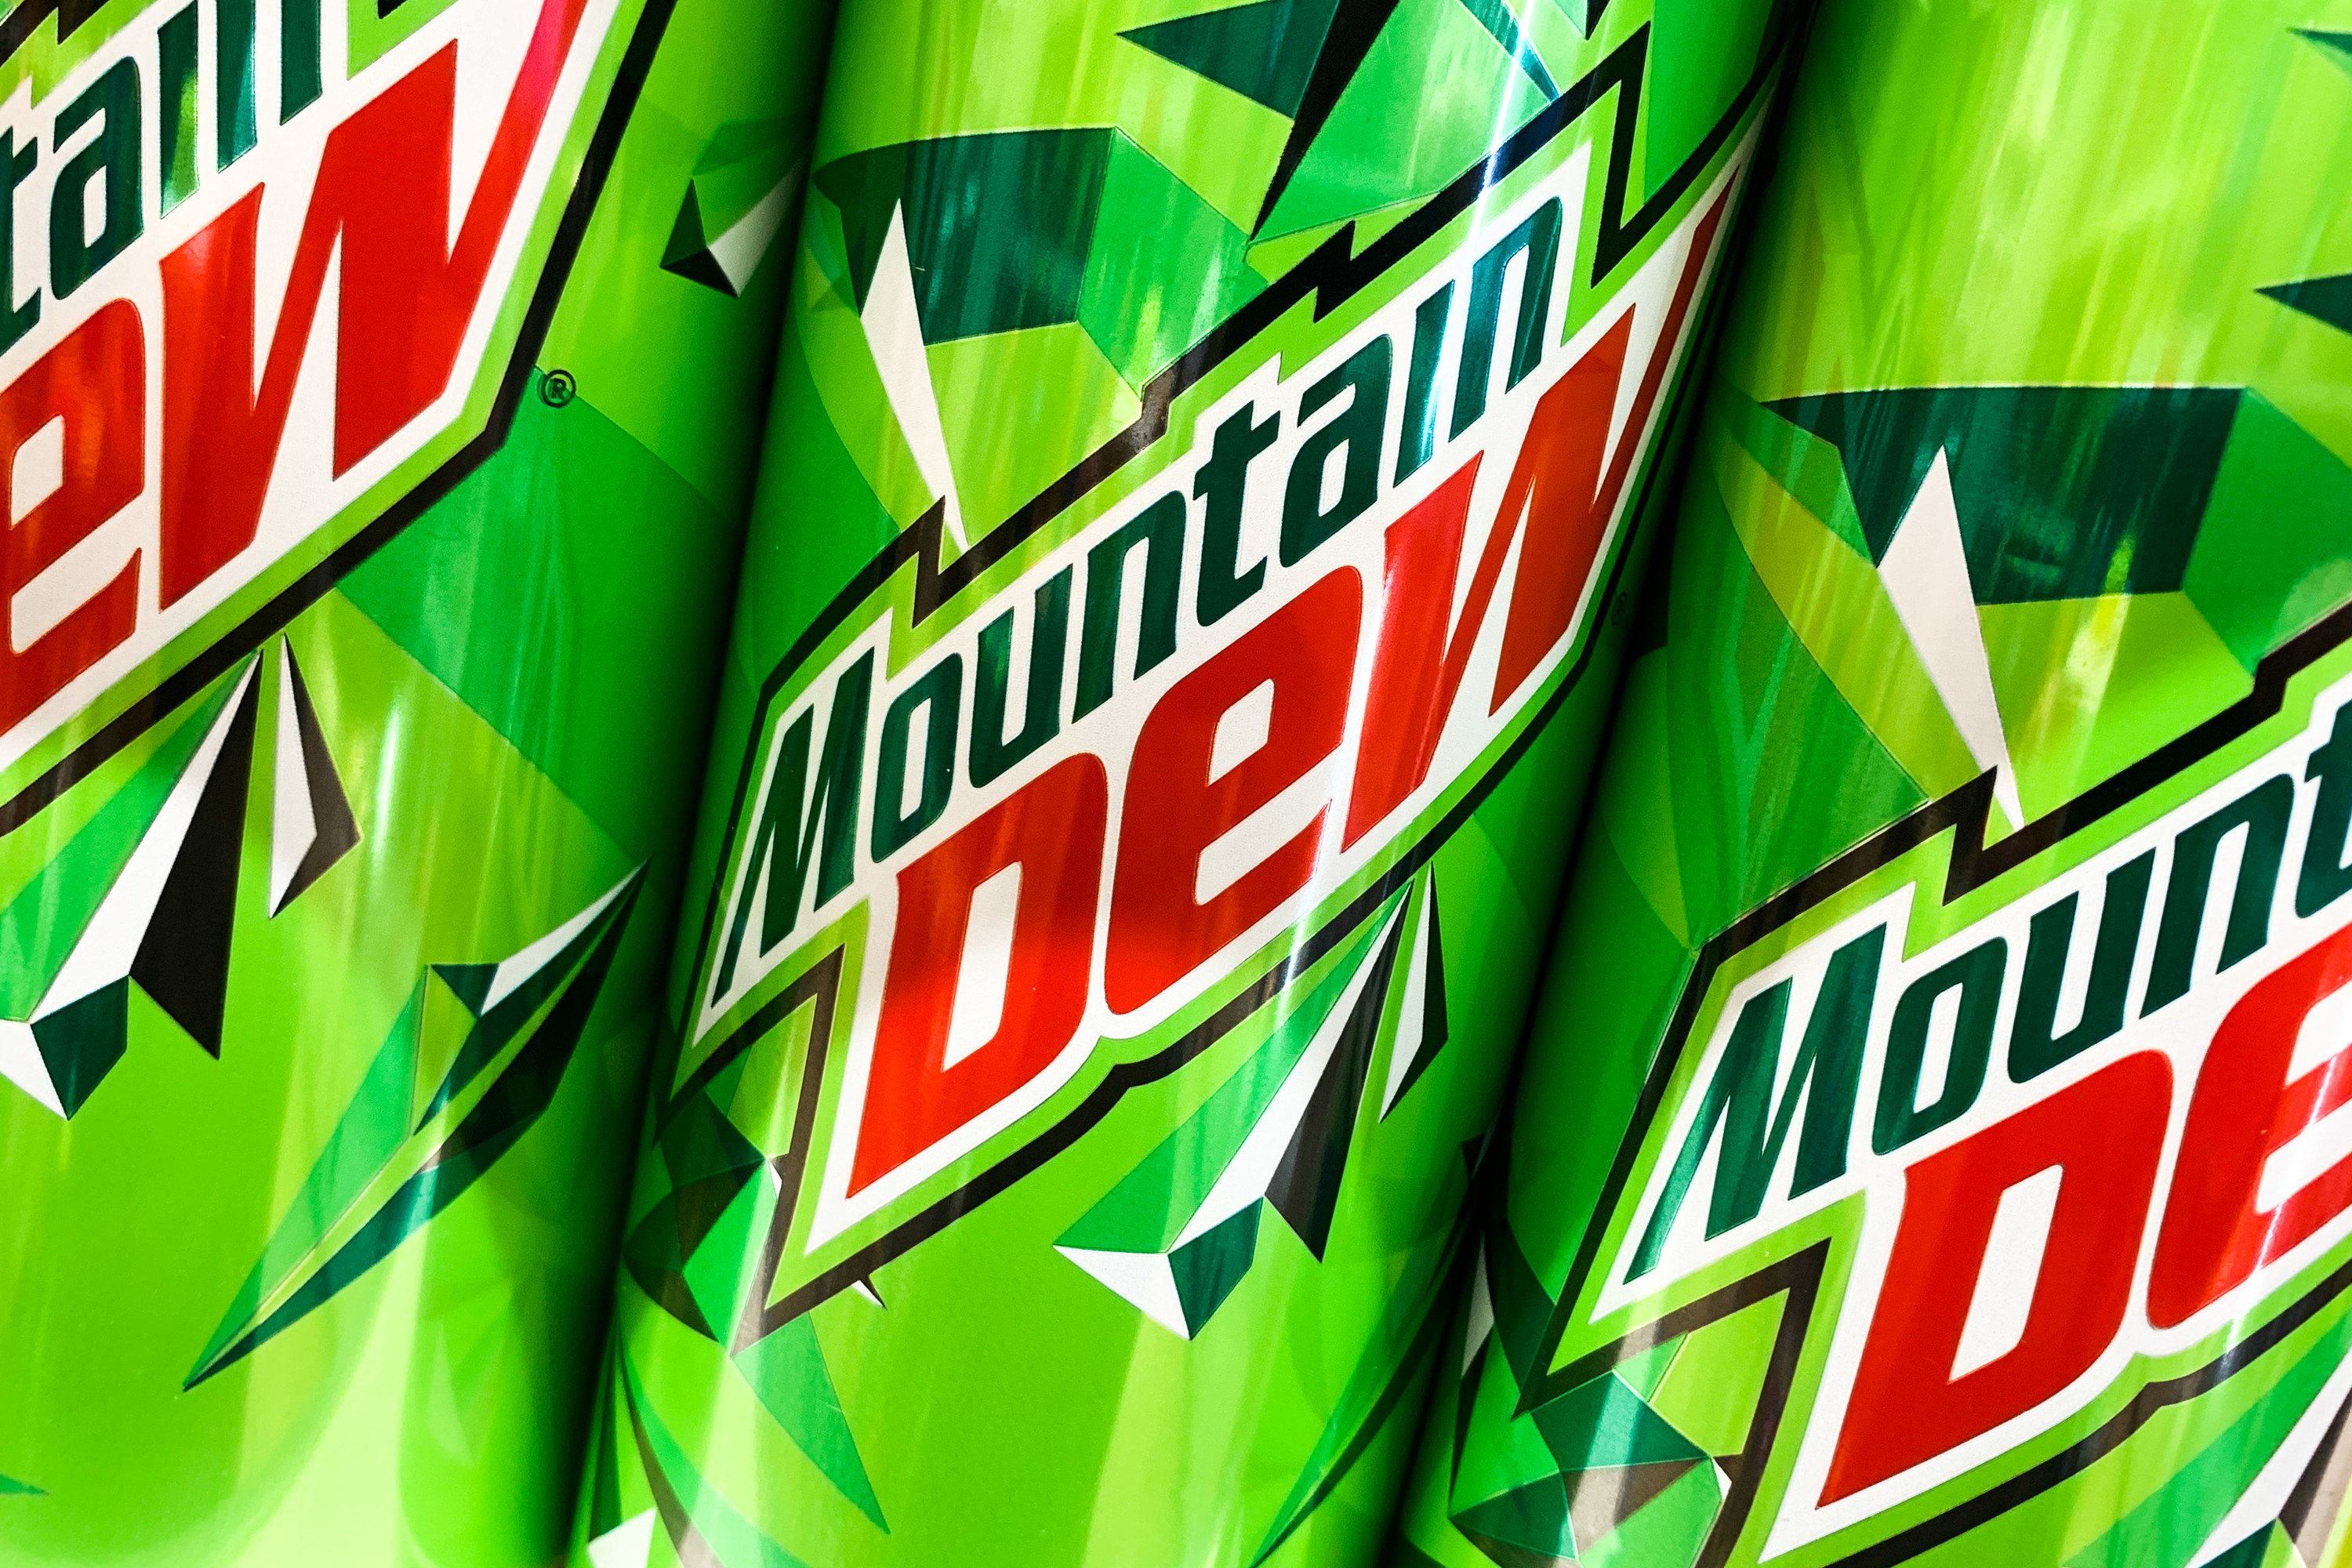 Cans of Mountain Dew